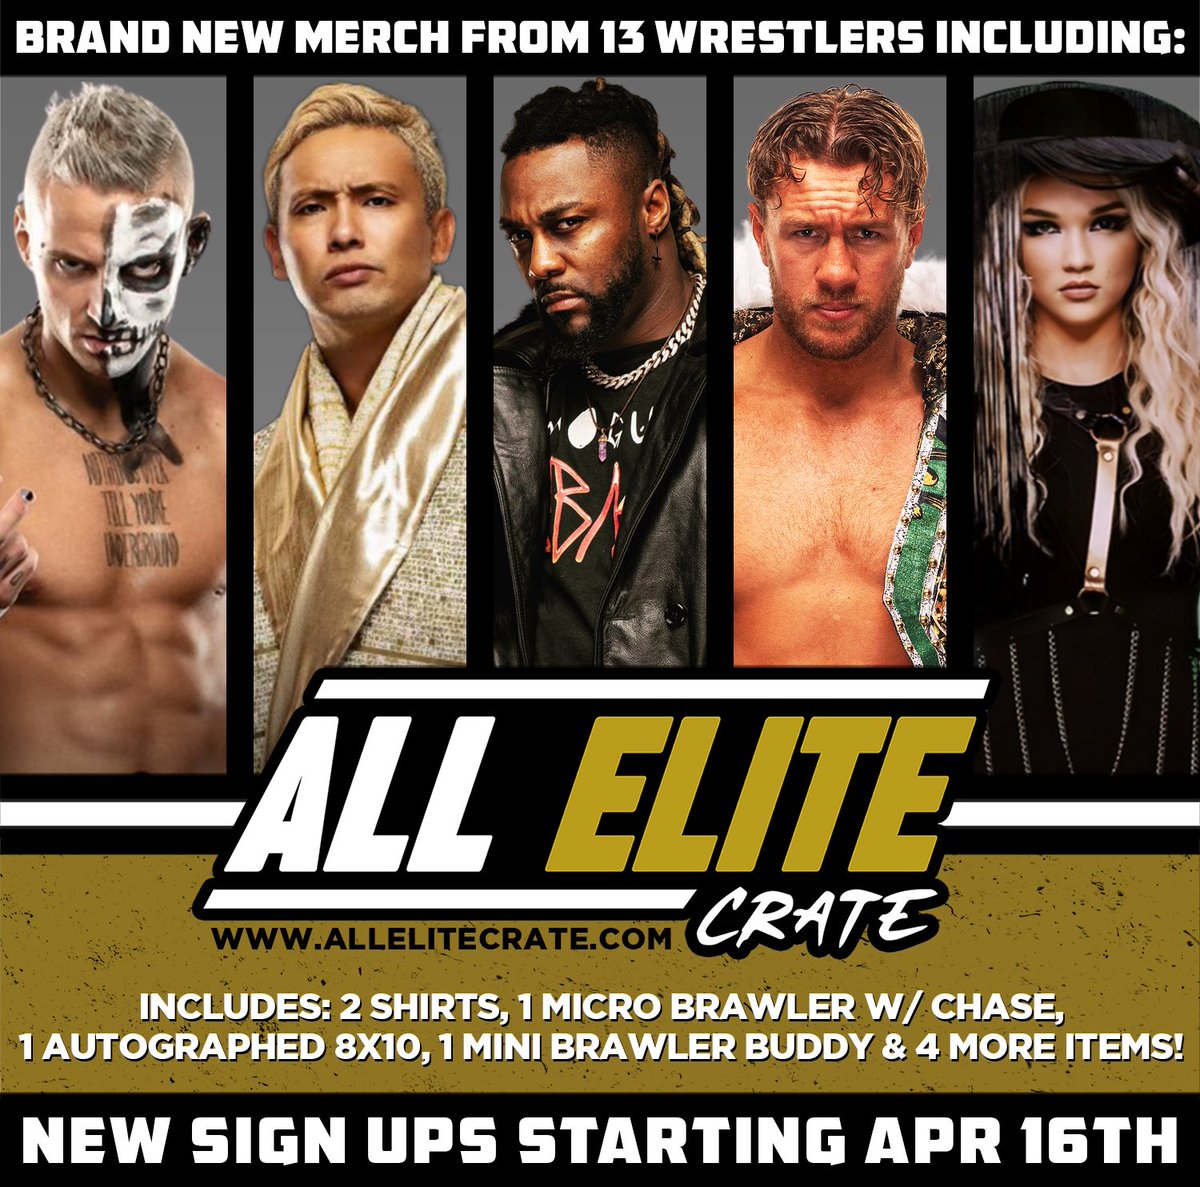 New sign ups for All Elite Crate have begun! Brand new merch from 13 wrestlers!! Sign up today at AllEliteCrate.com! #AEW #AEWDynamite #AllEliteCrate